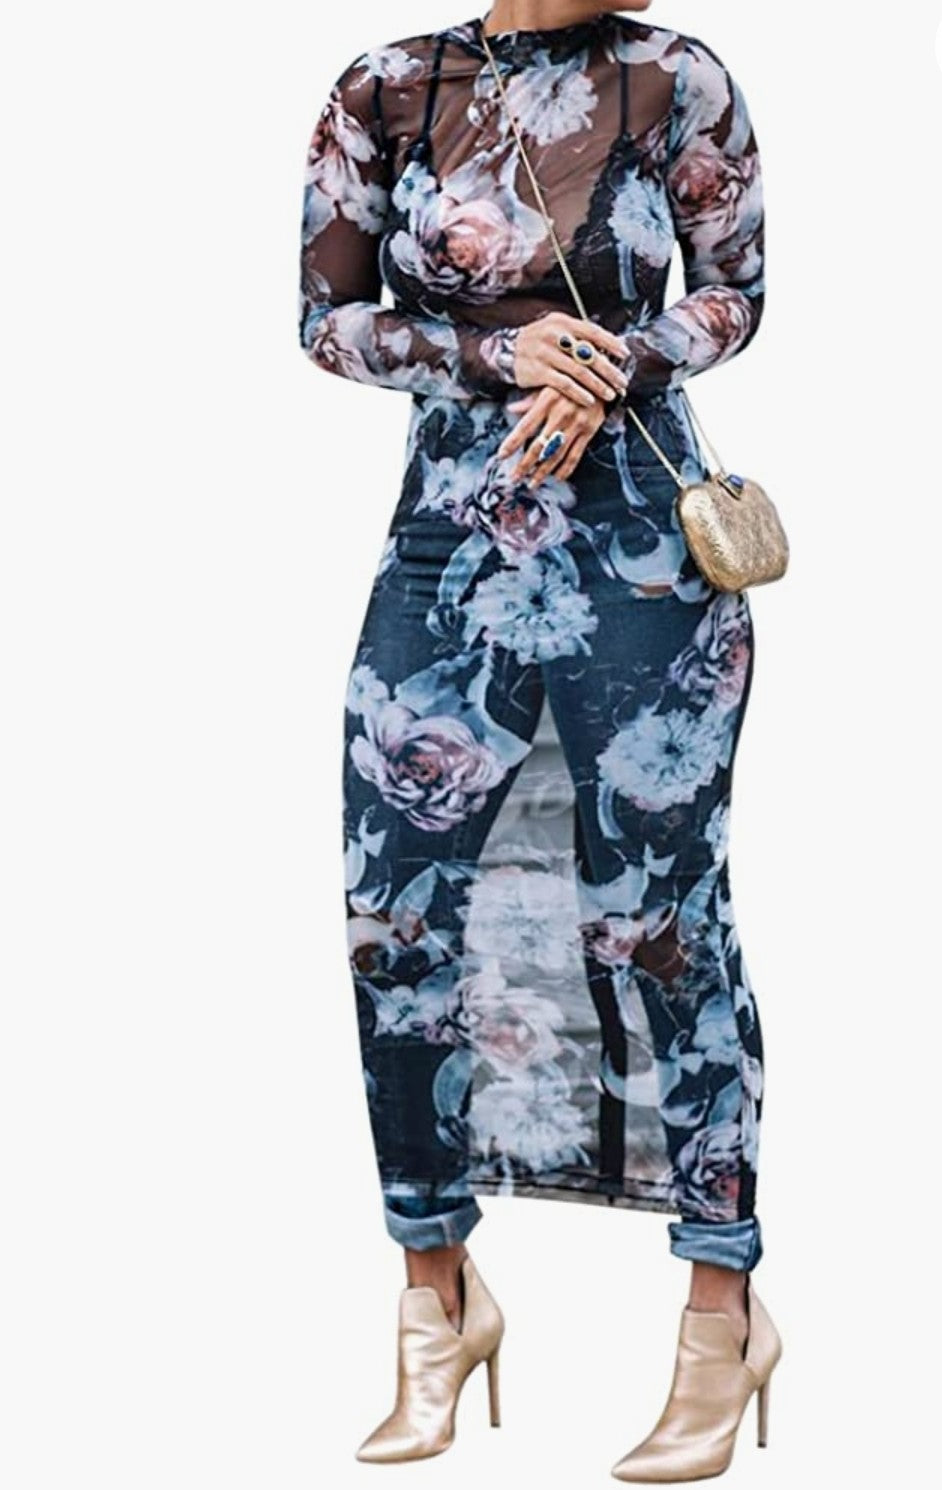 Sexy See Through Floral Printed Translucent Bodycon Dress